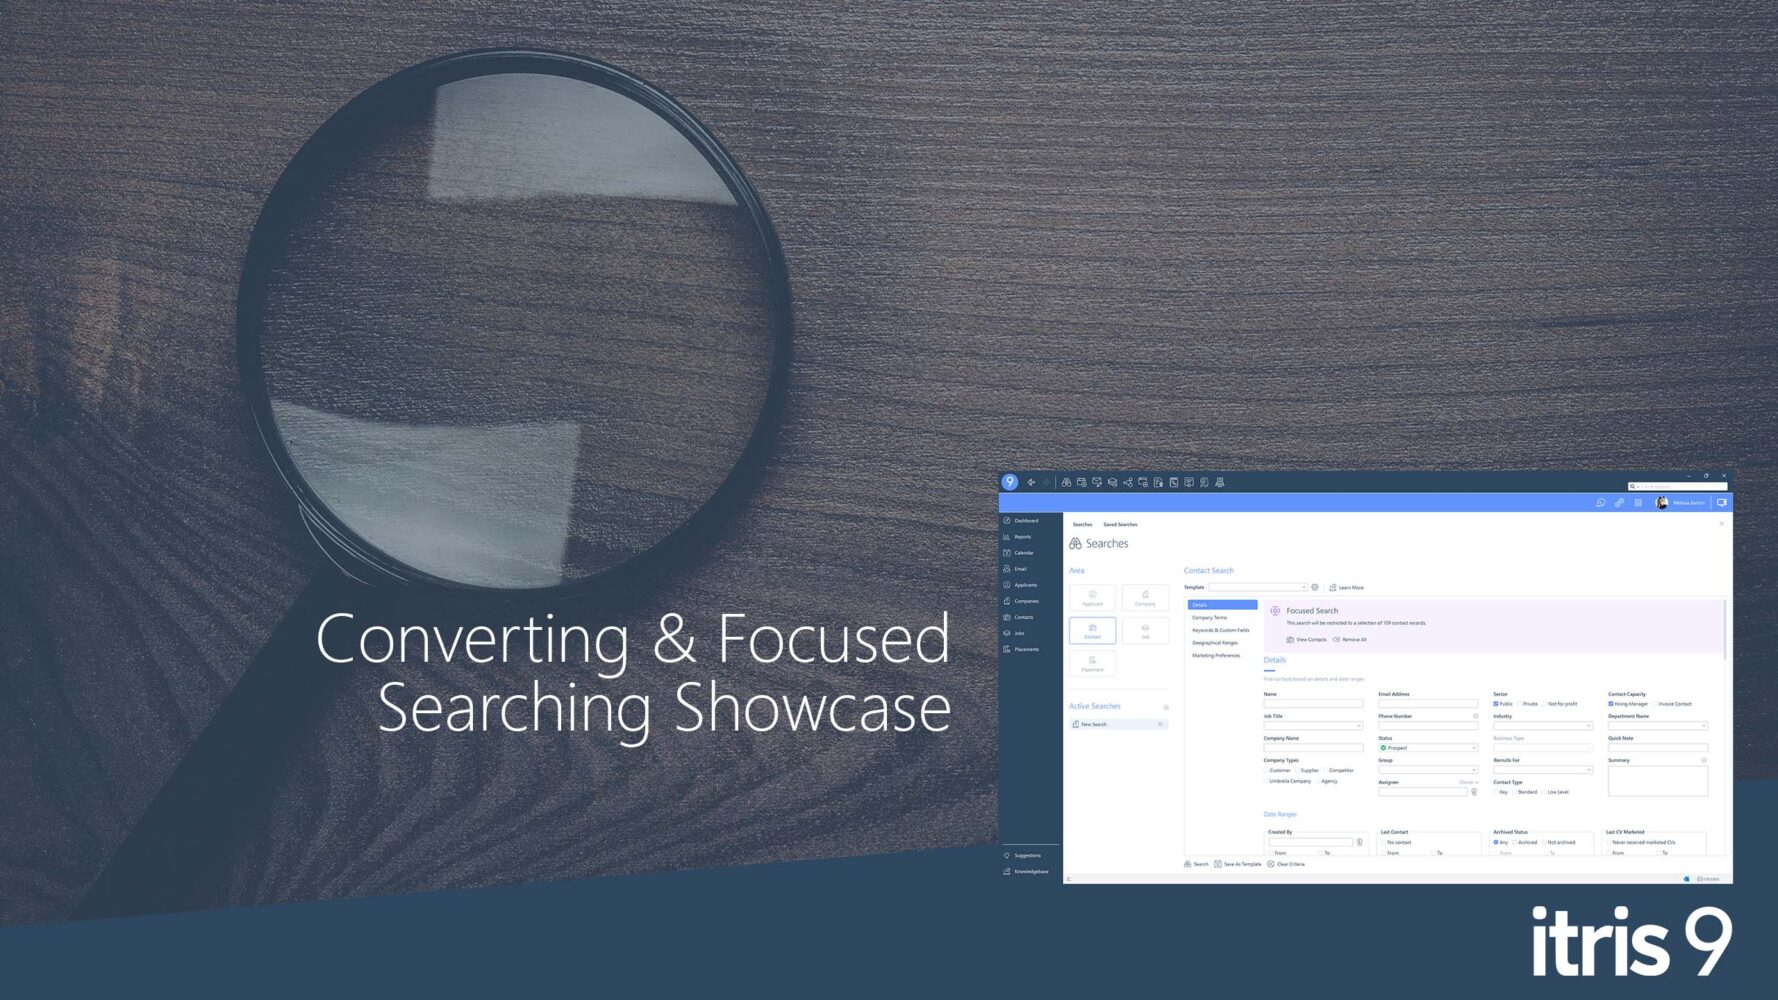 Recruitment CRM software itris 9 | Searching | Showcase Video